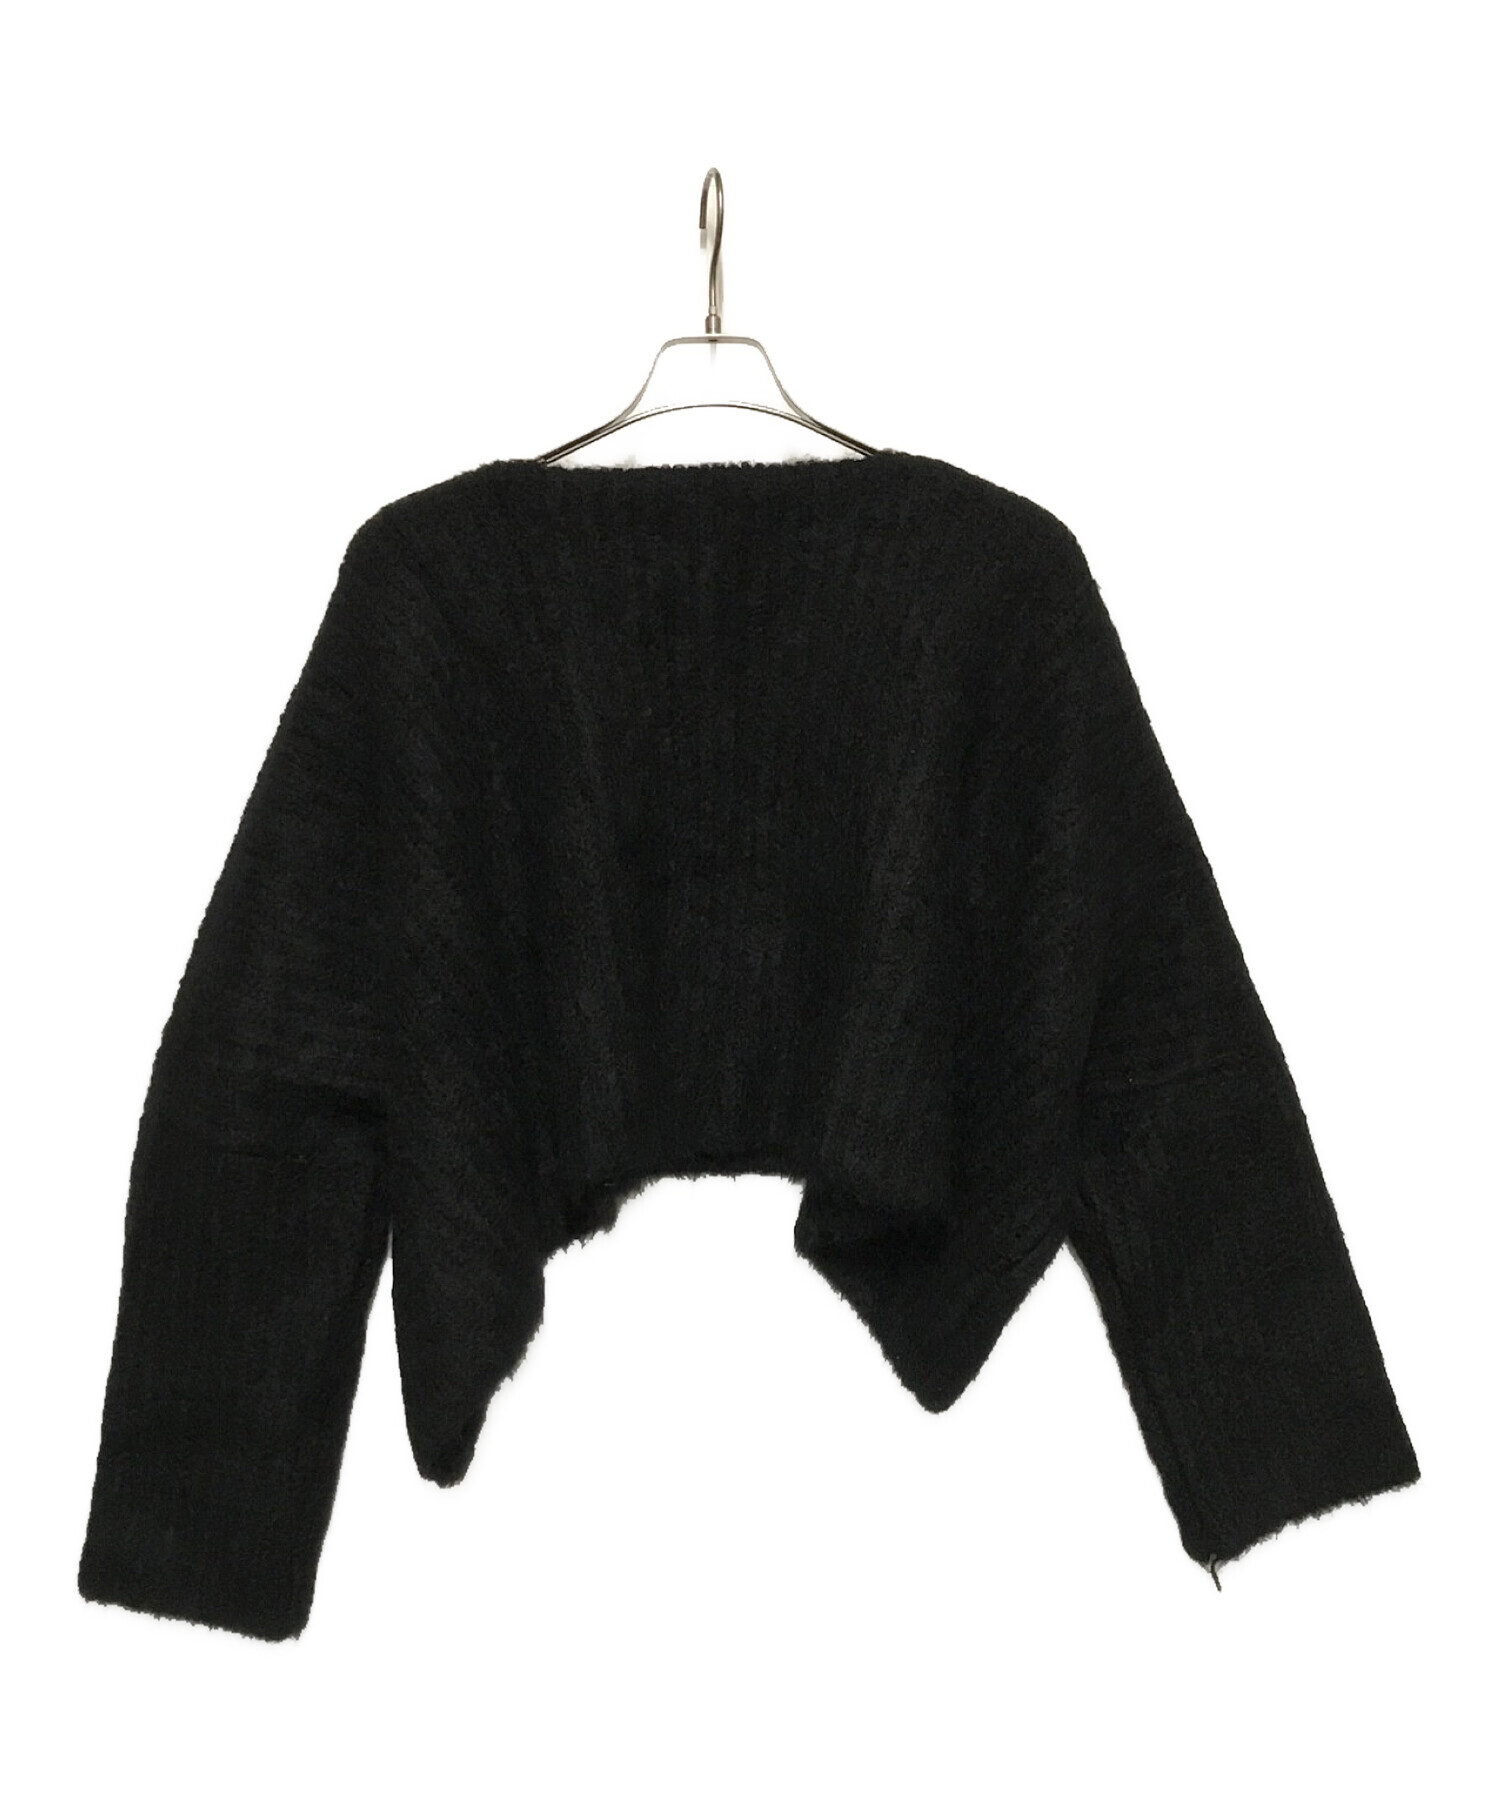 THE SHISHIKUI HAND MADE KNIT / L.BEIGE - トップス